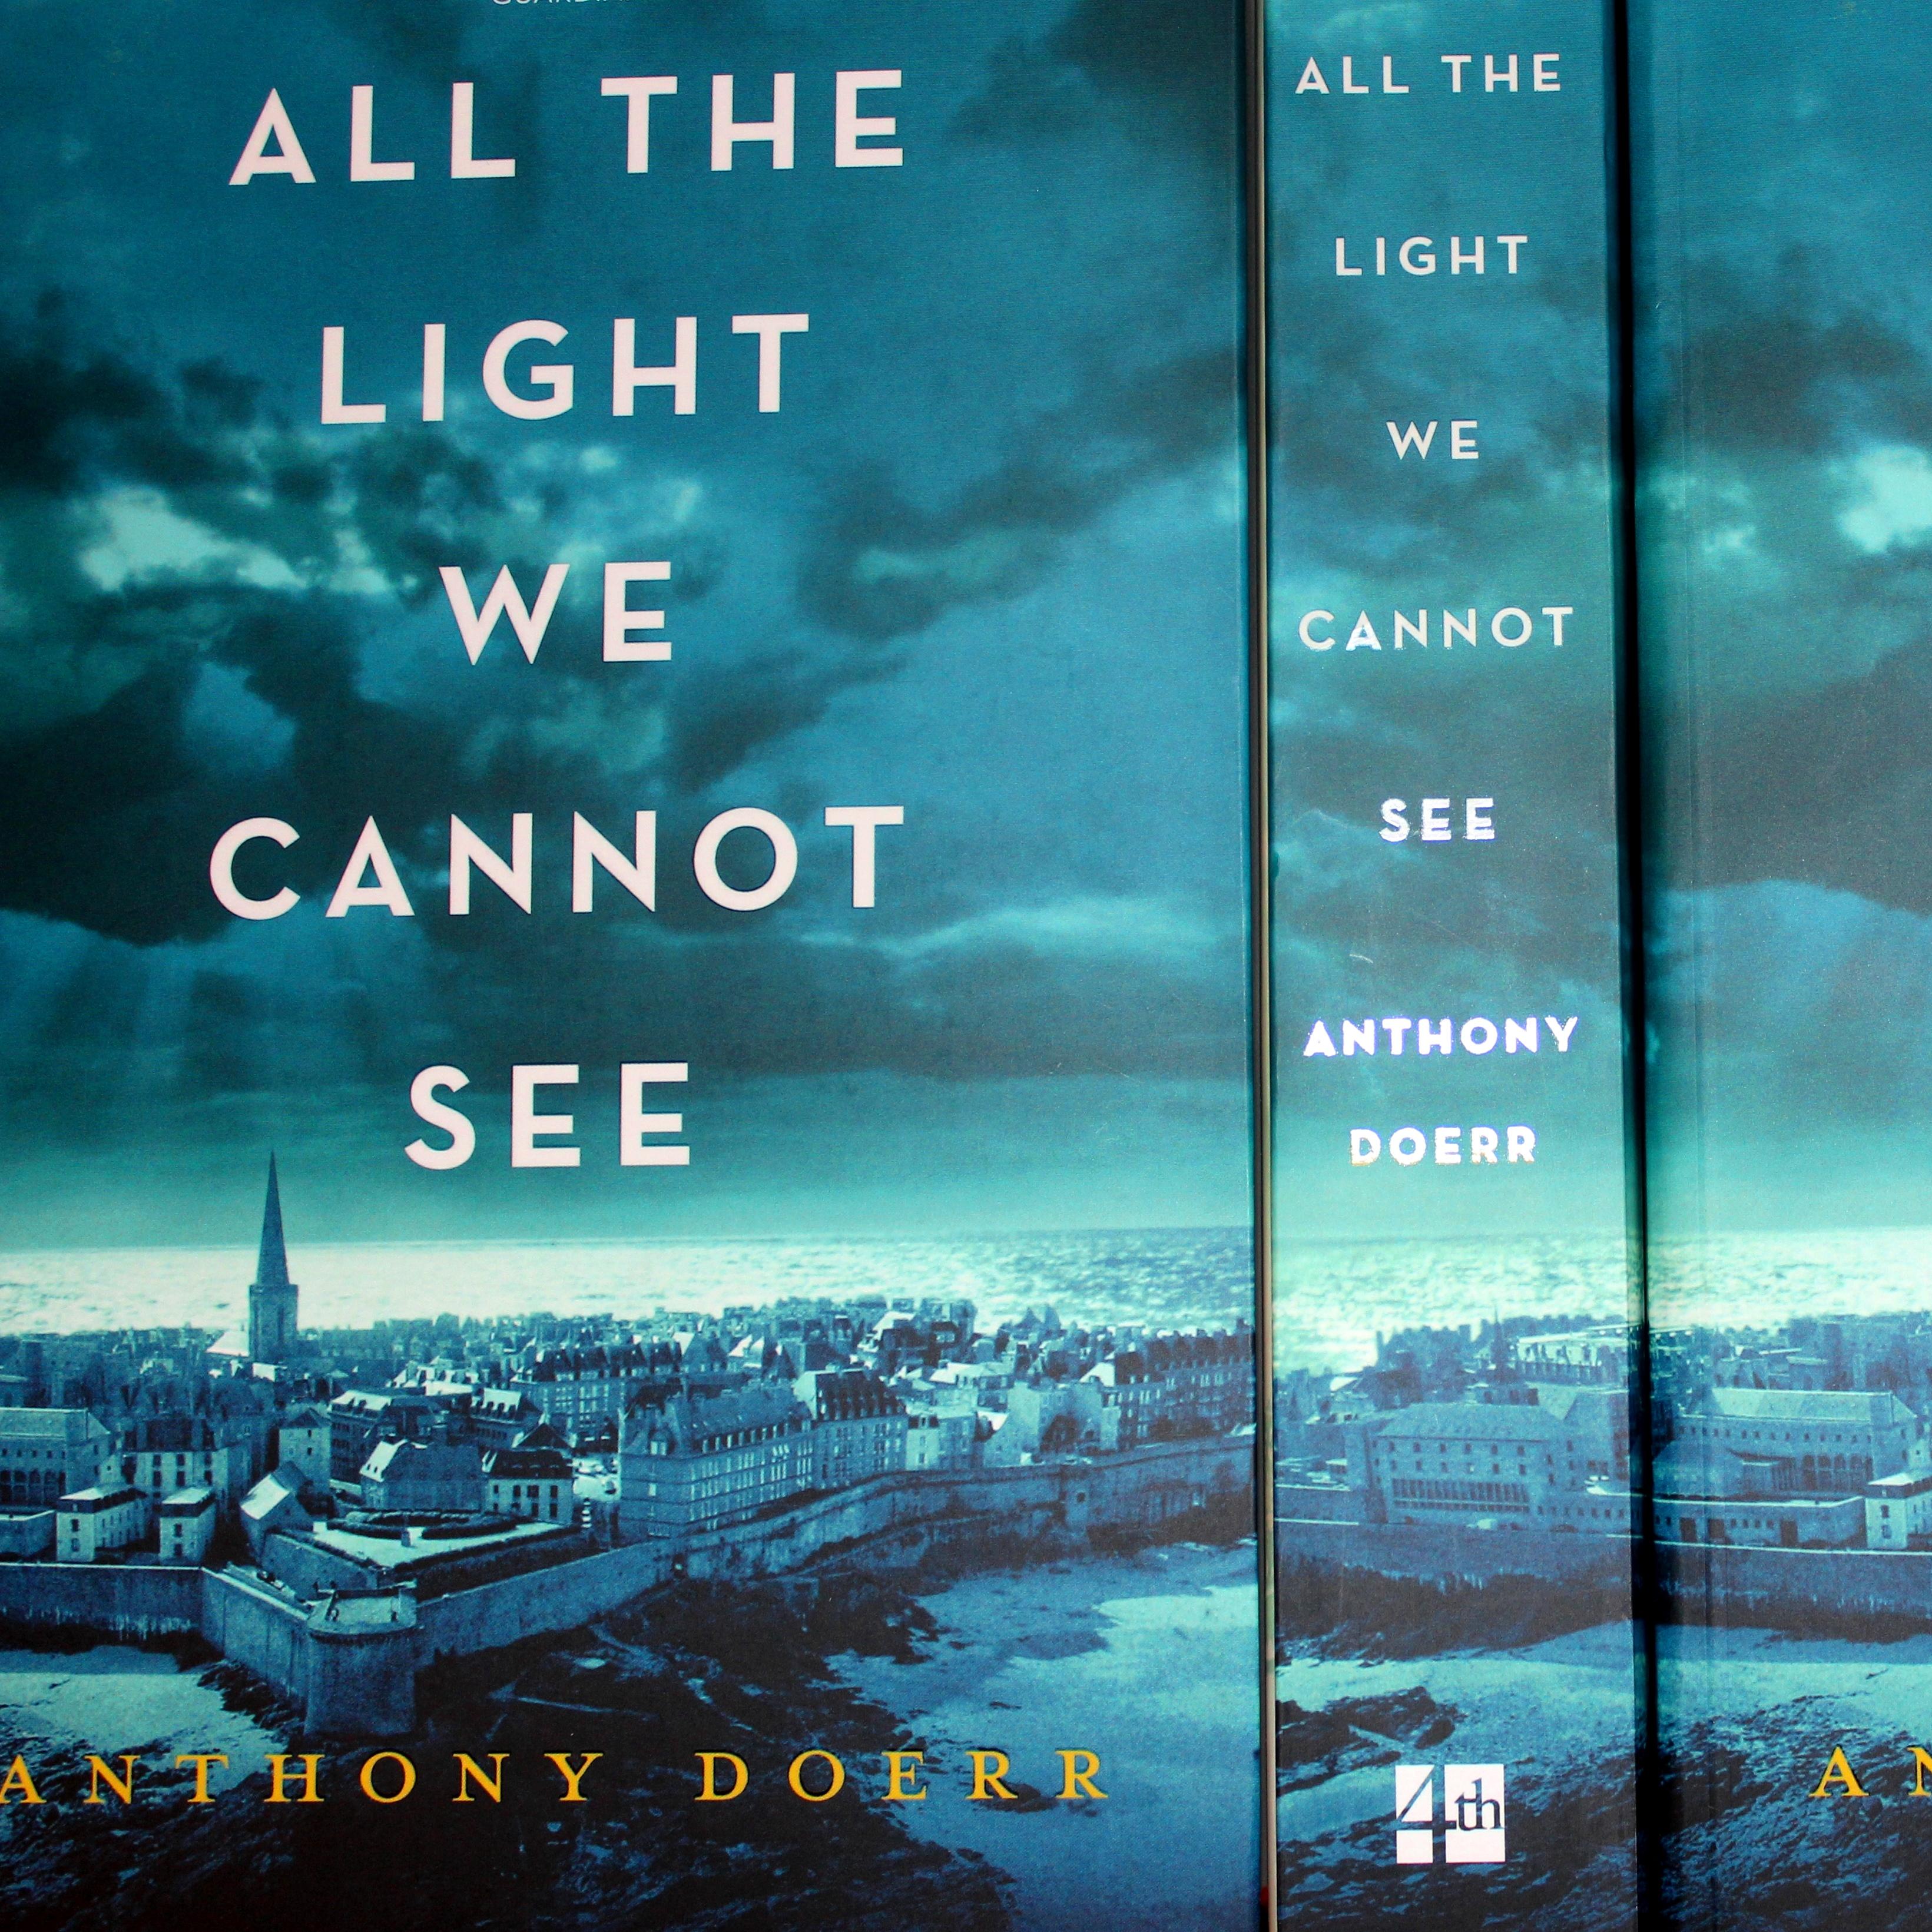 All the light we cannot see pdf free. download full